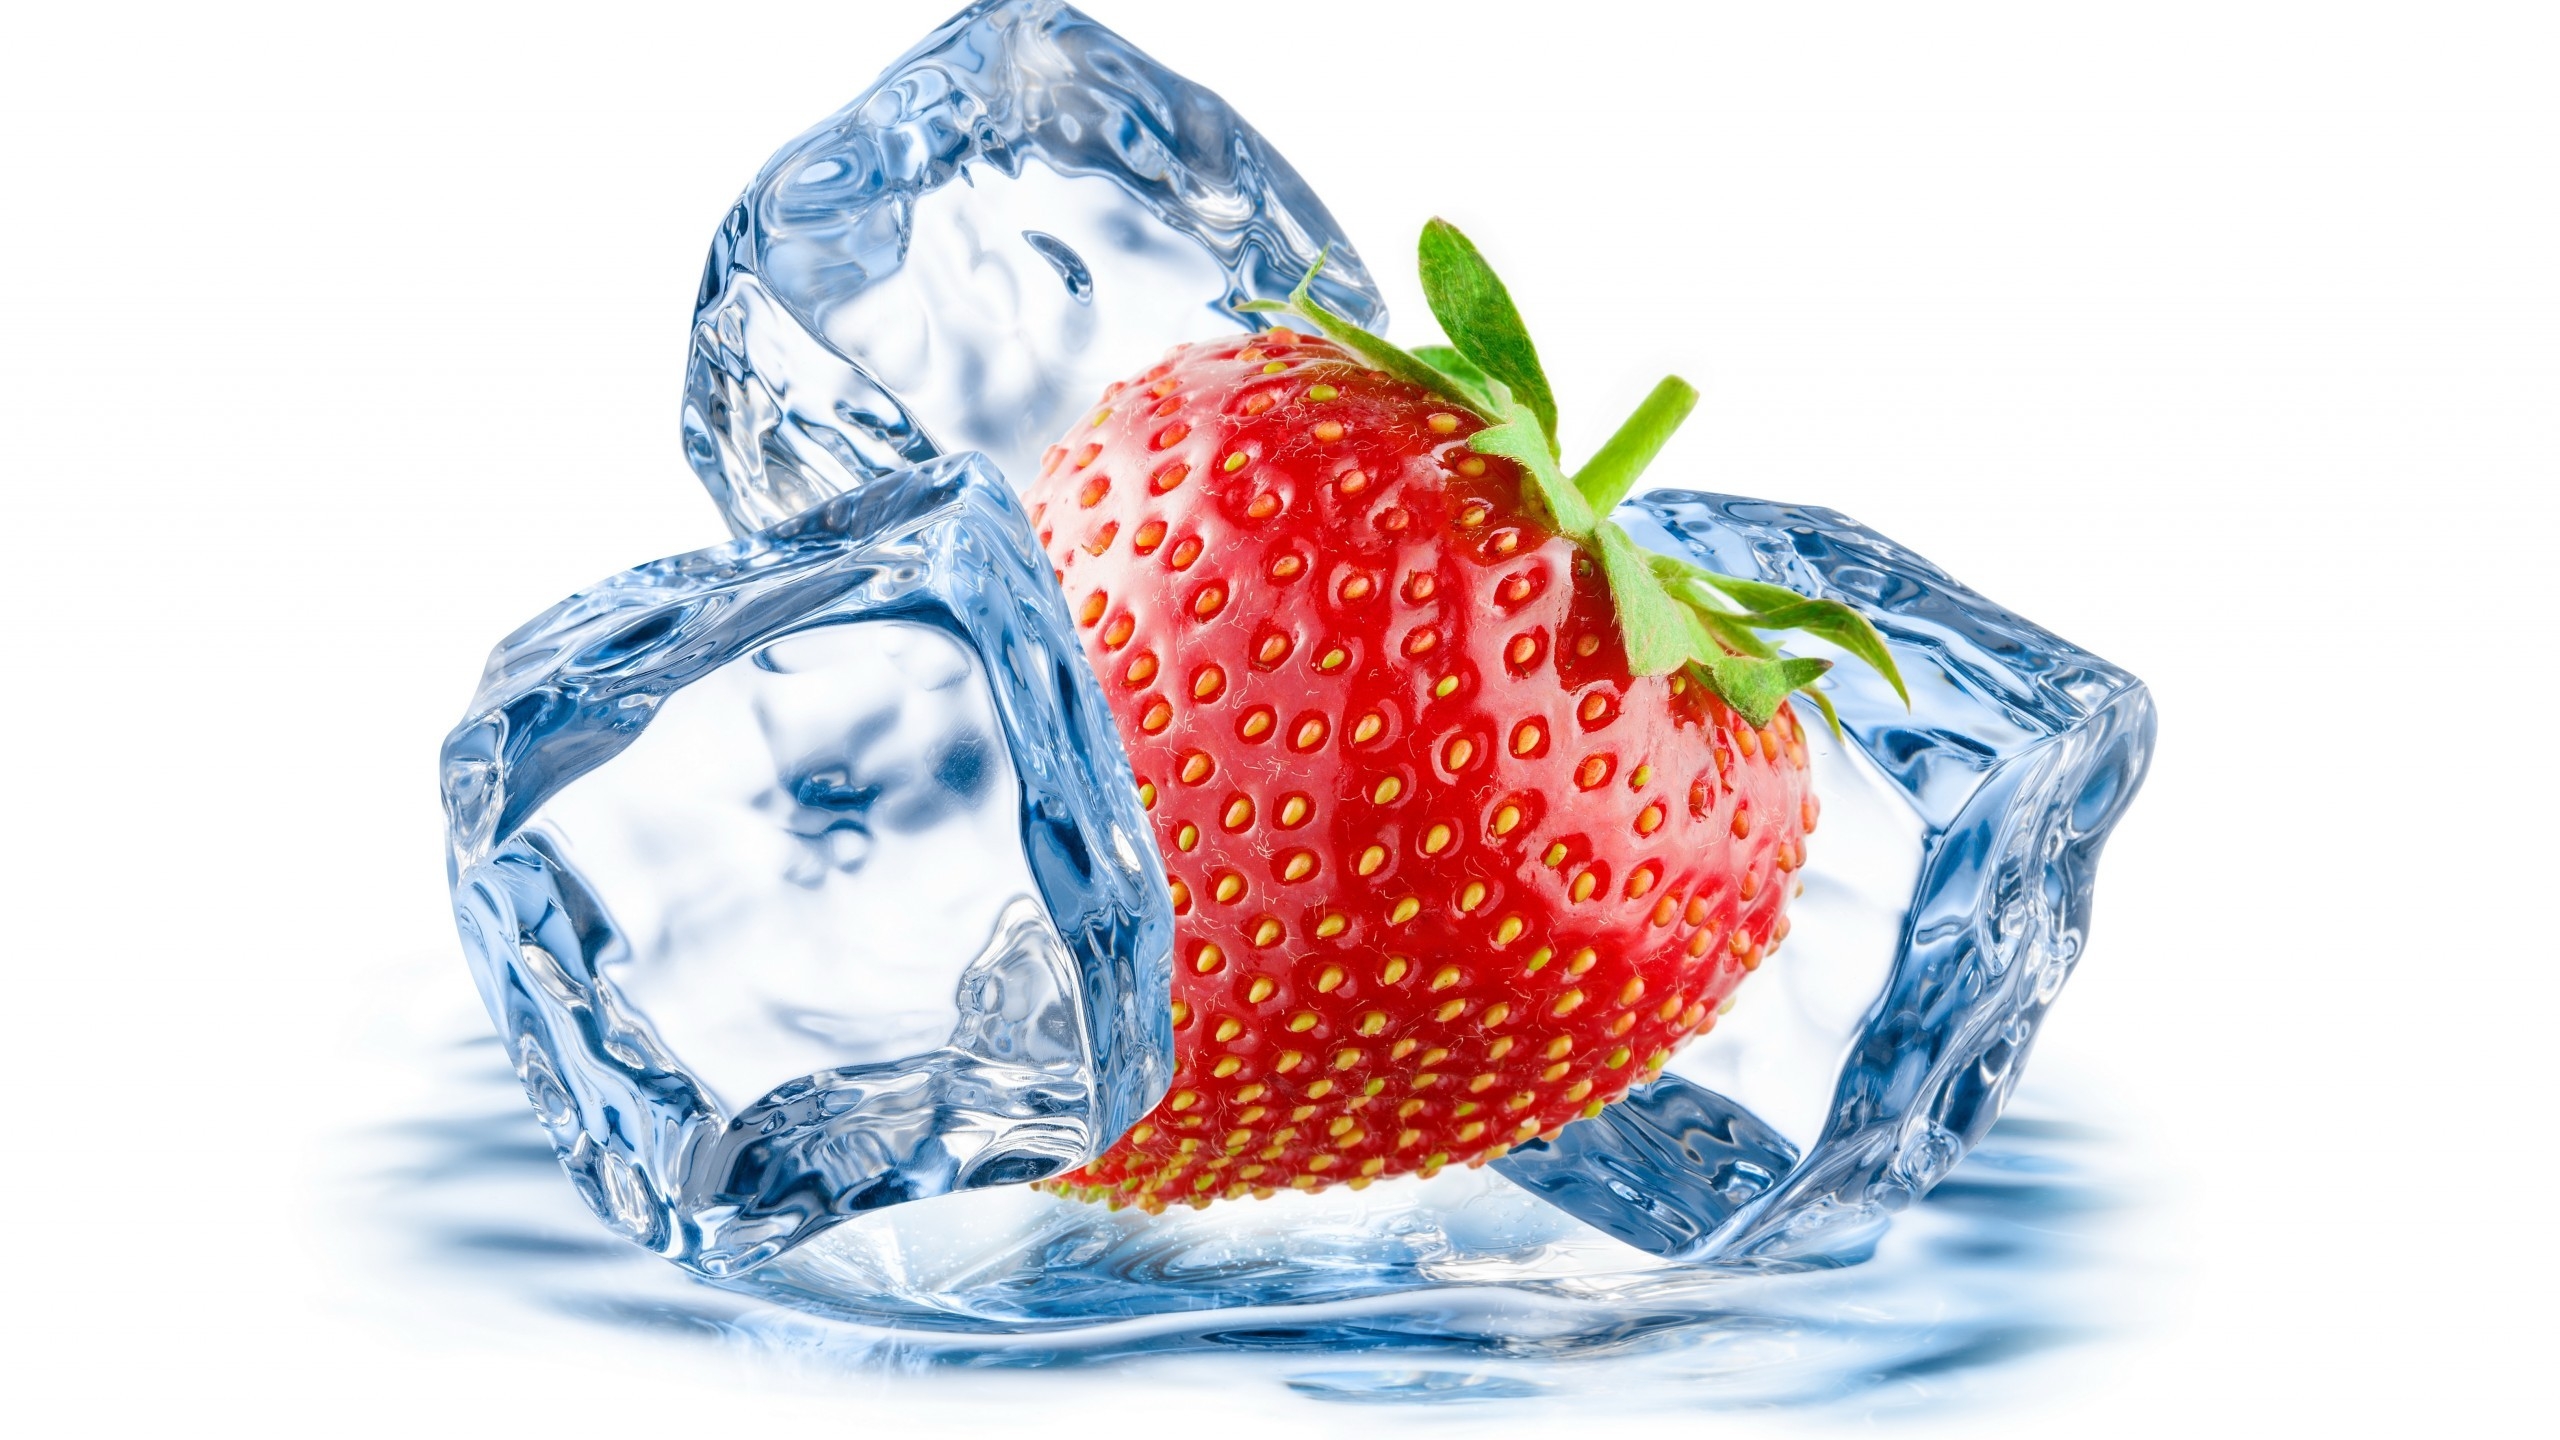 Ice and Strawberry for 2560x1440 HDTV resolution